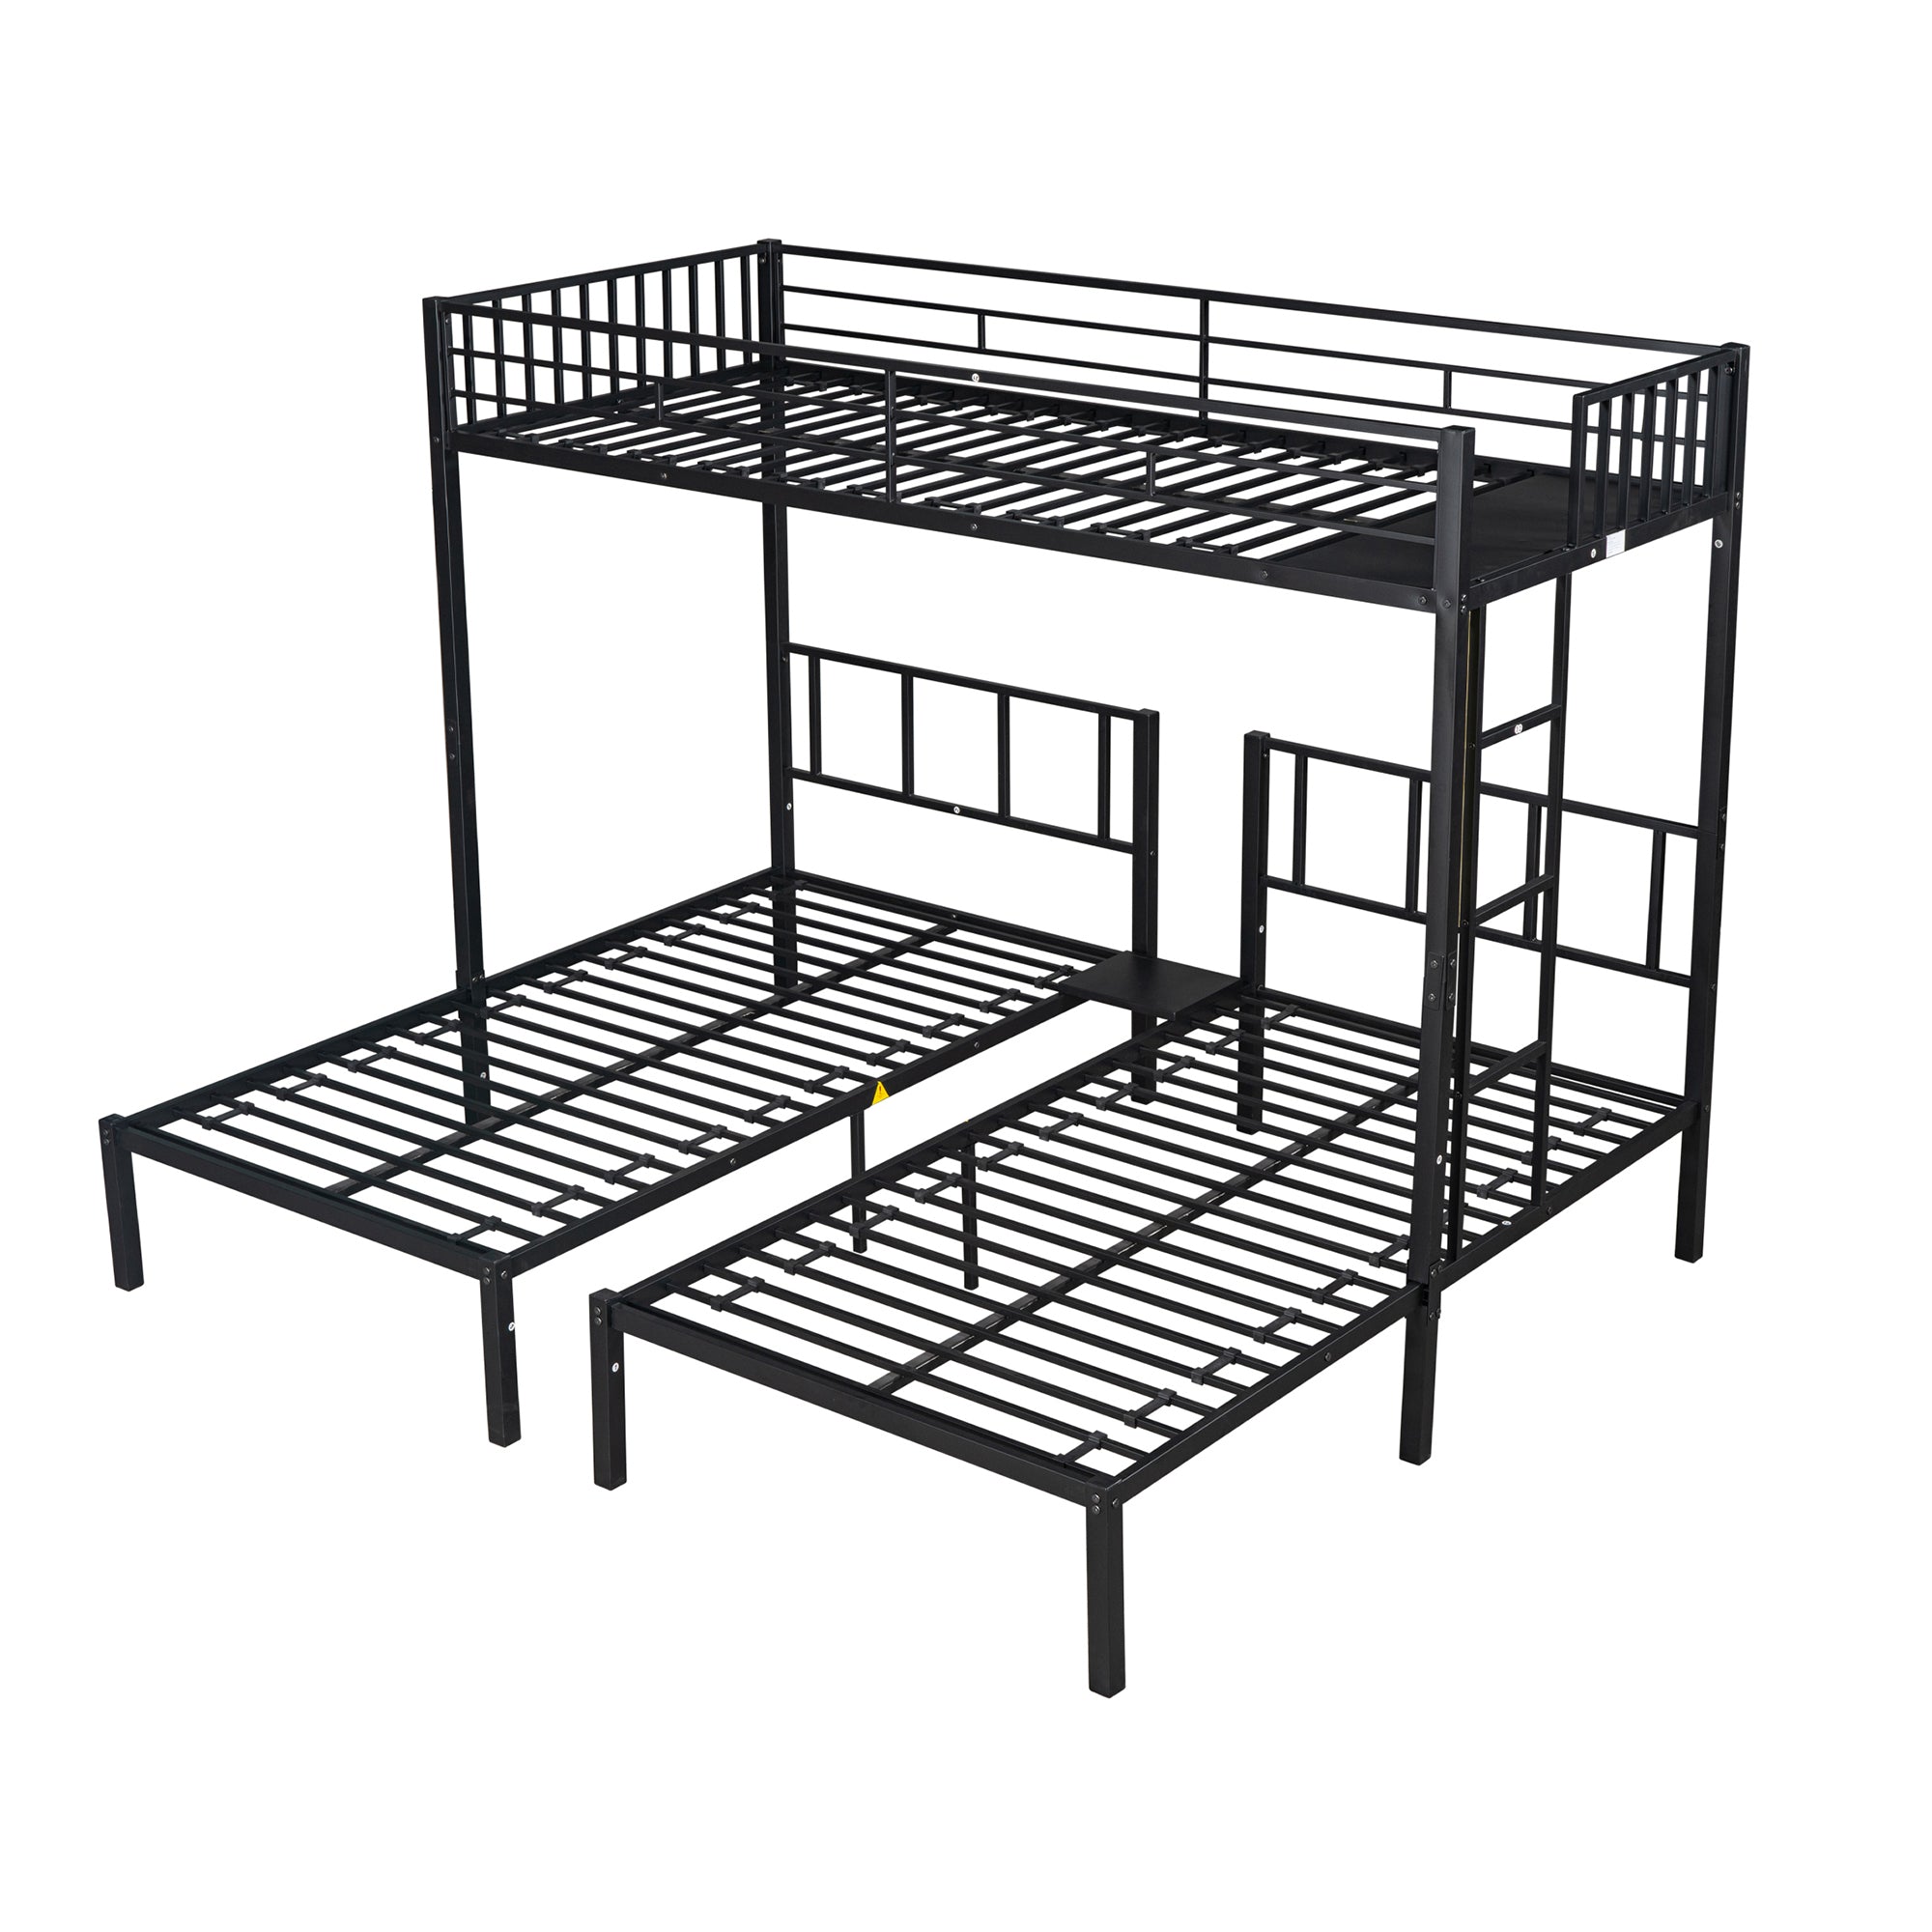 Metal Twin Triple Bunk Bed, Twin over Twin over Twin Bunk Bed for 3 Kids, Noise Reduced Structure, Separates Into 3 Twin Beds, Black